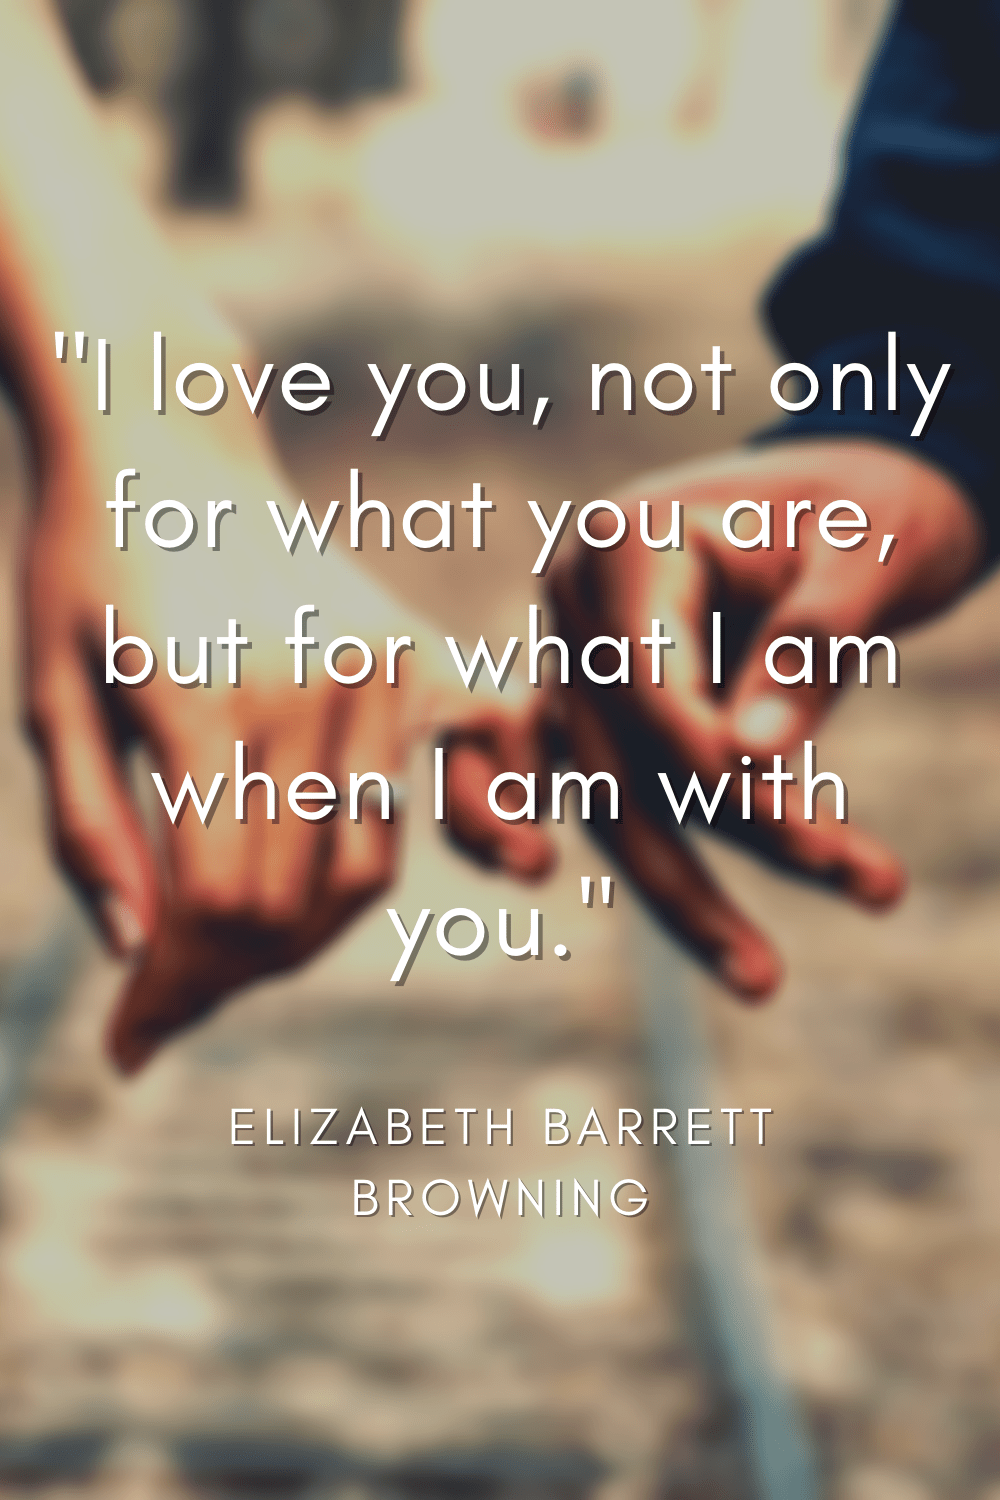 I love you, not only for what you are, but for what I am when I am with you. - Elizabeth Barrett Browning